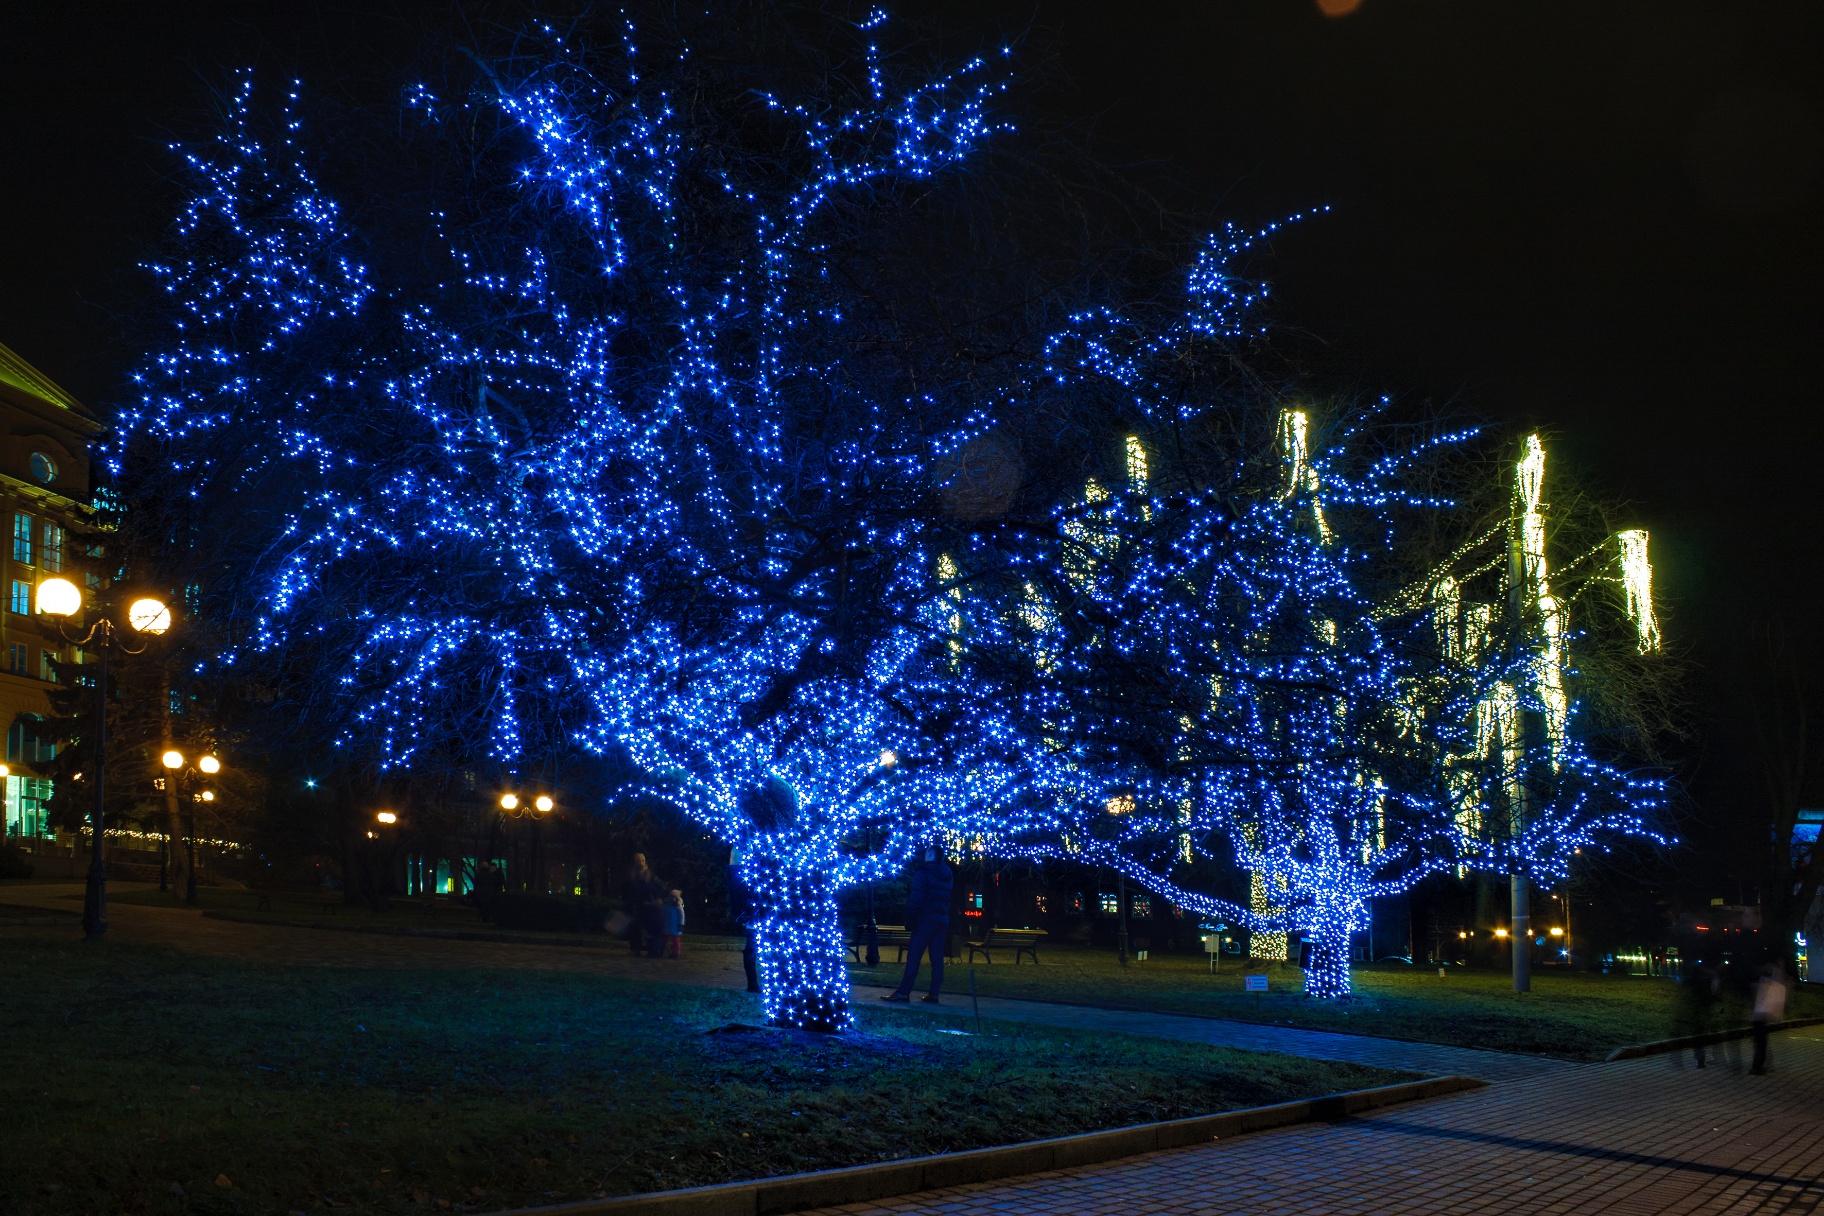 Glowing Blue Christmas Lights And Trees In The Park